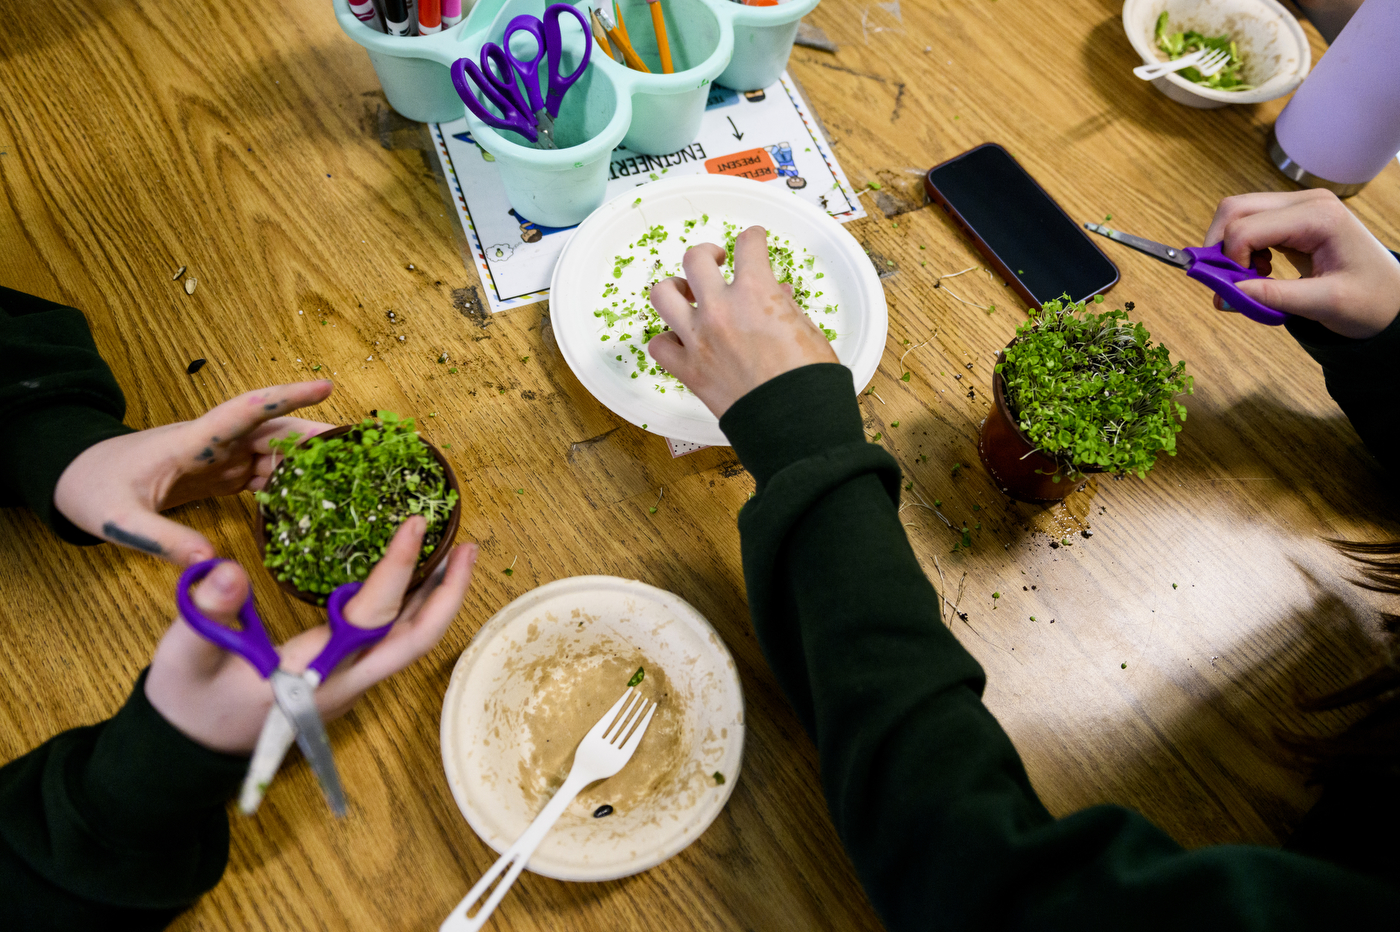 students working with microgreens